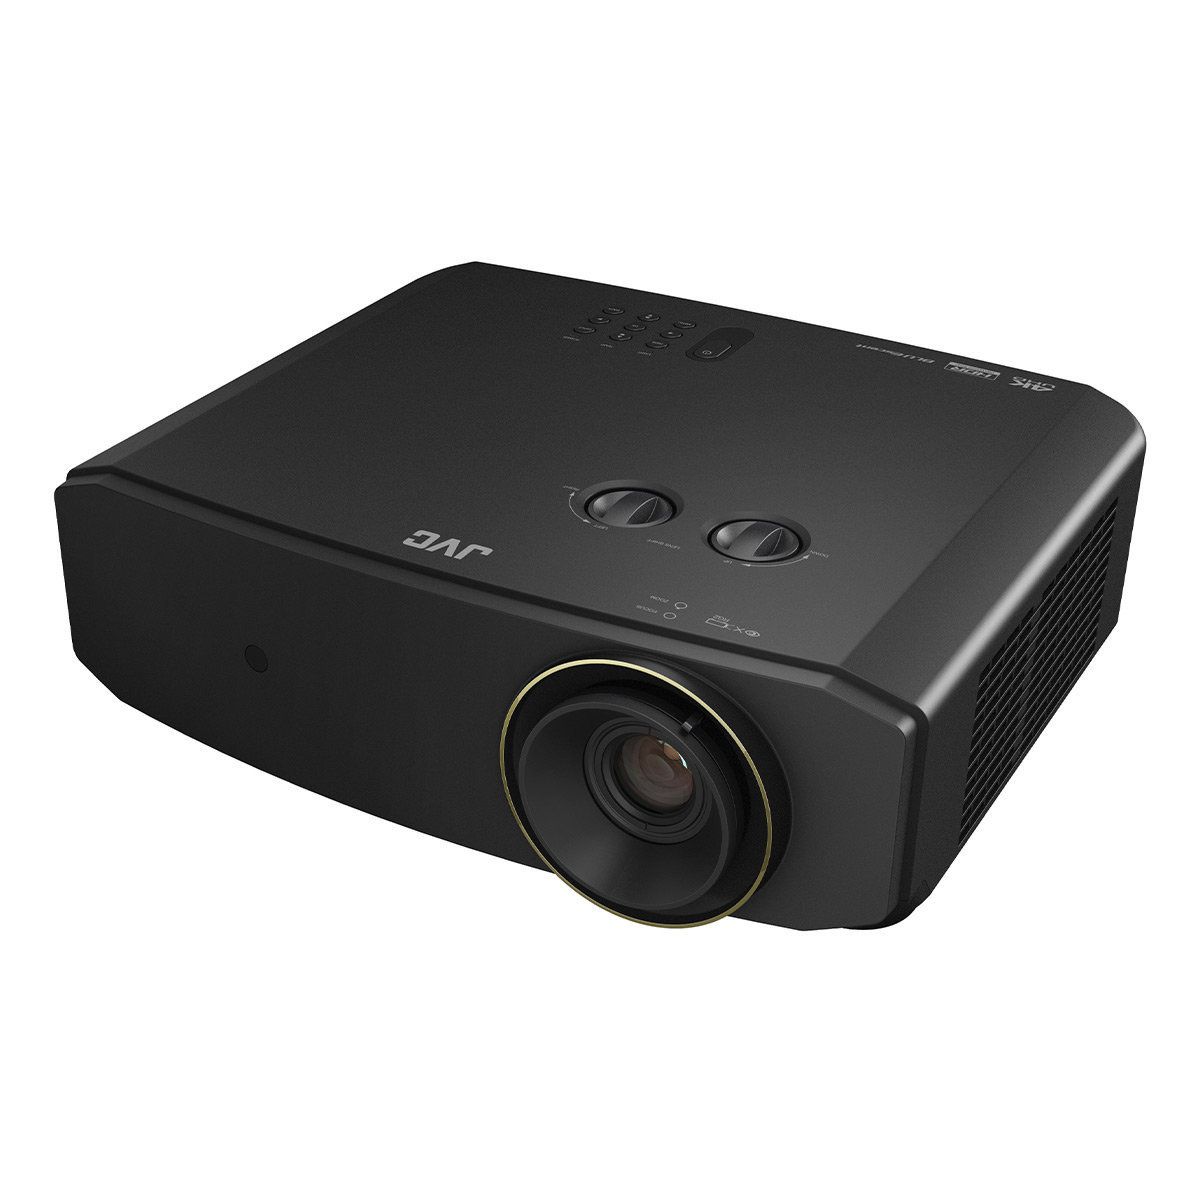 JVC LX-NZ30 4K Laser Home Theater Projector - Black angled top view